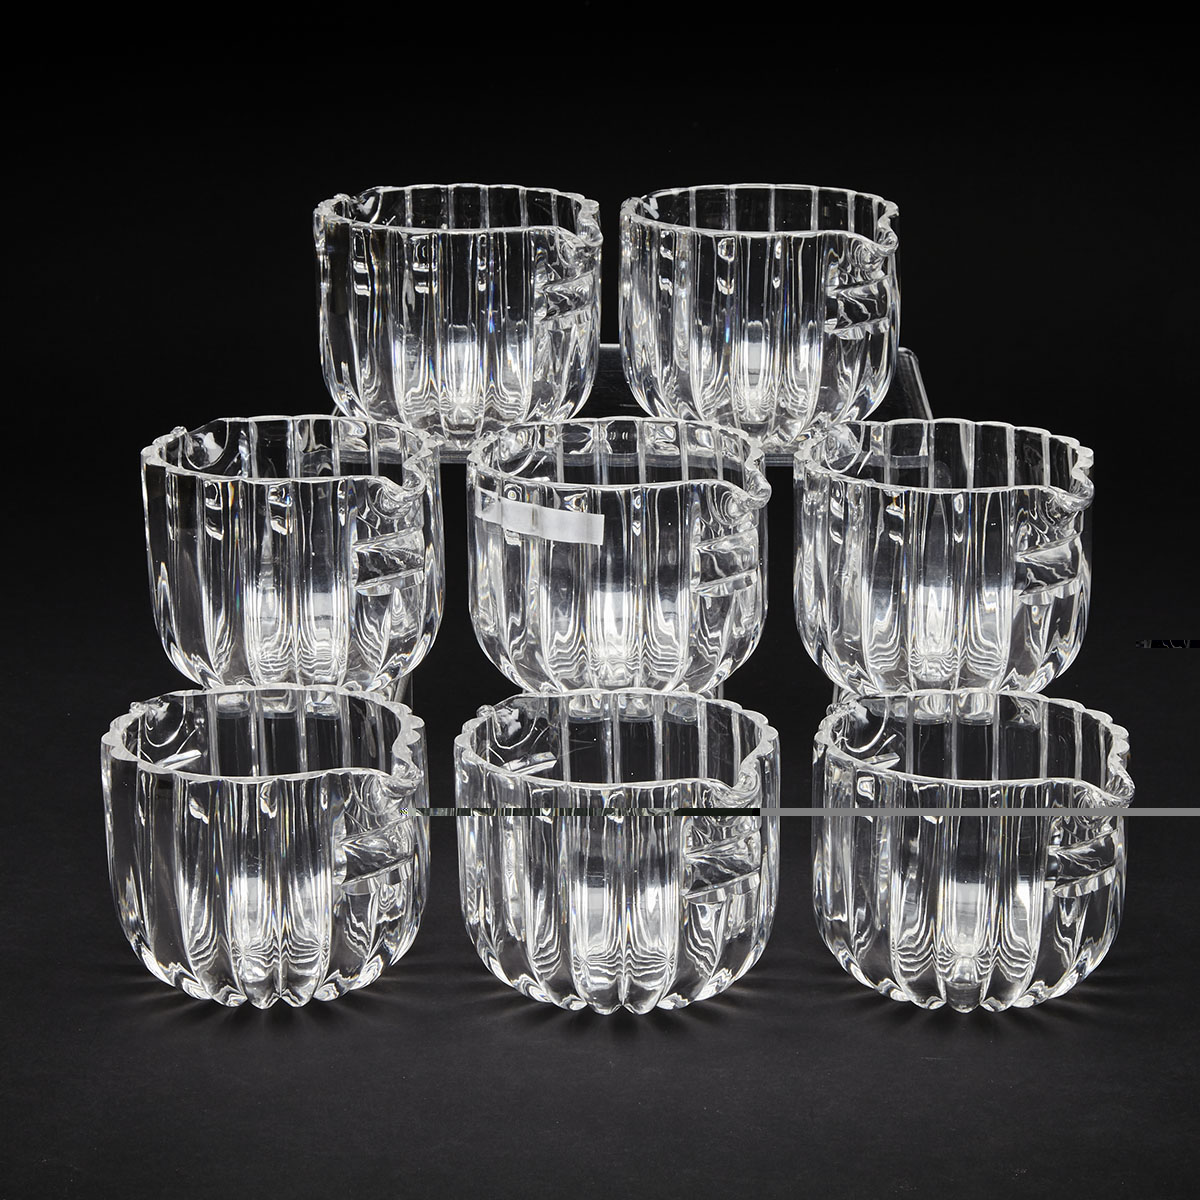 Set of Eight Cut Glass Wine Rinsers, c.1825